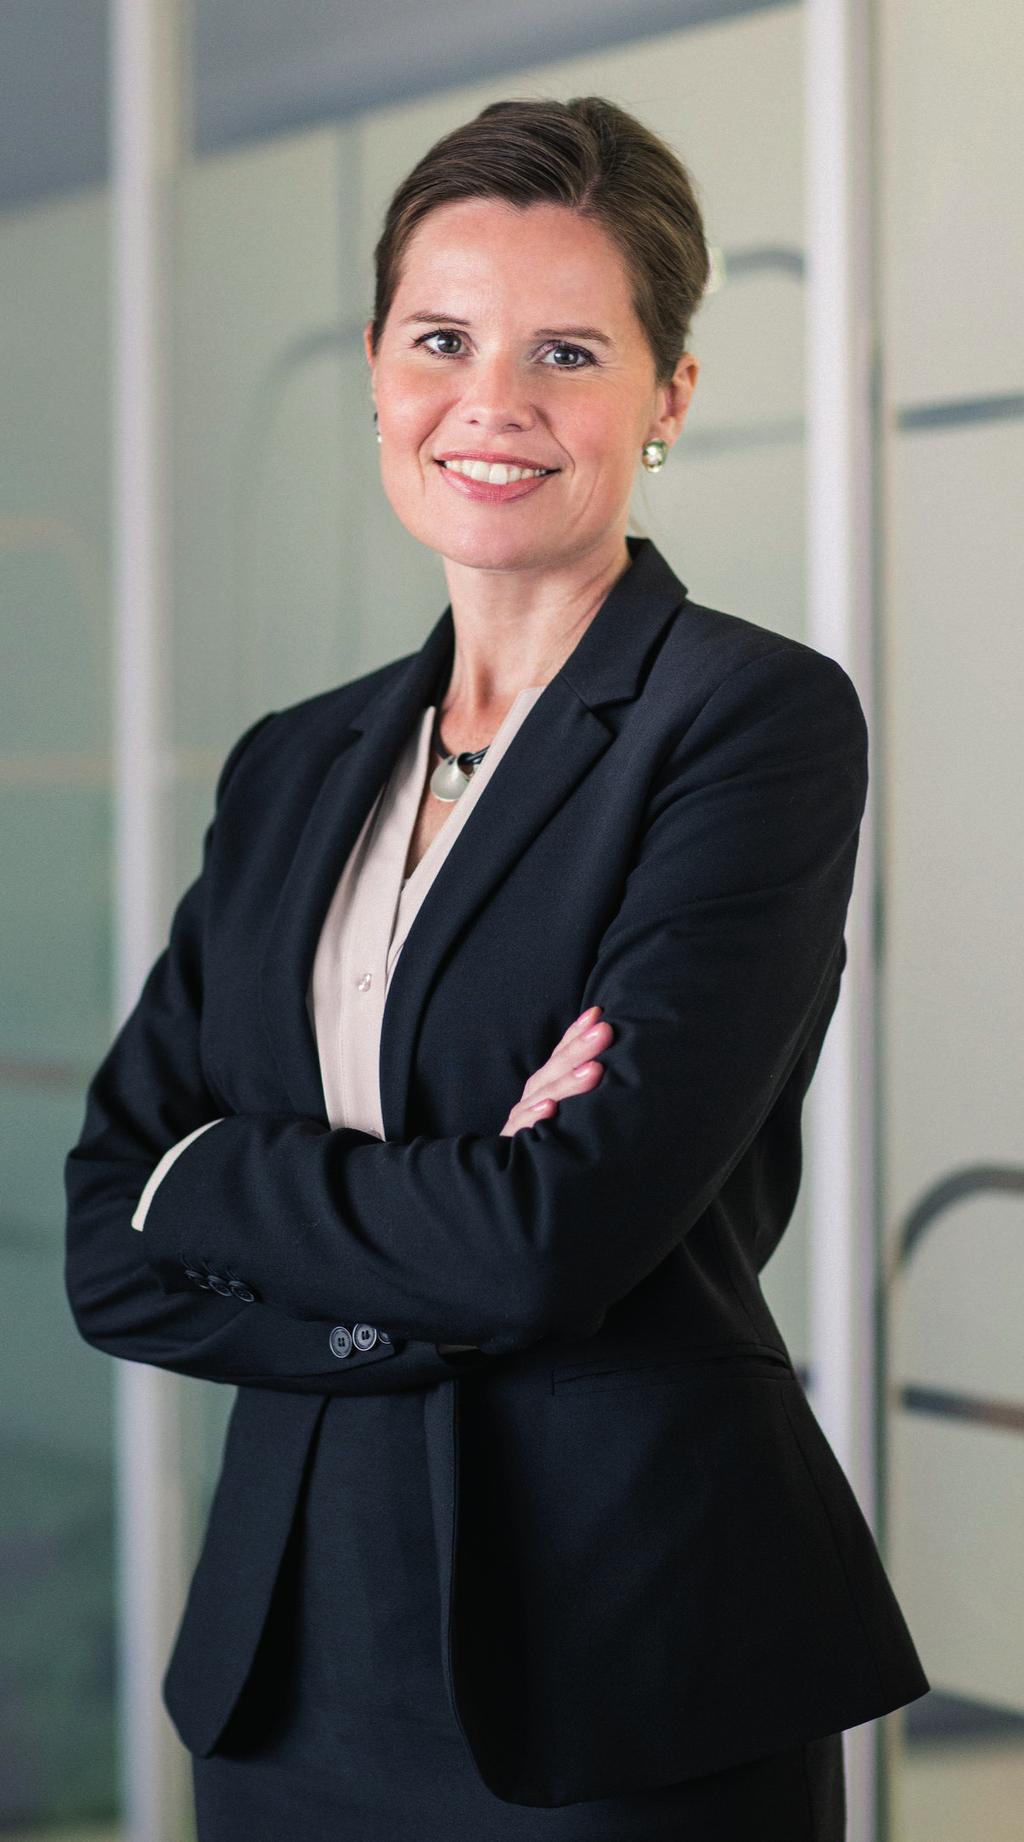 CAMILLA SYLVEST JOINS EXECUTIVE MANAGEMENT Camilla Sylvest Executive vice president, and head of Commercial Strategy & Corporate Affairs Camilla Sylvest, who until September 217 was the senior vice